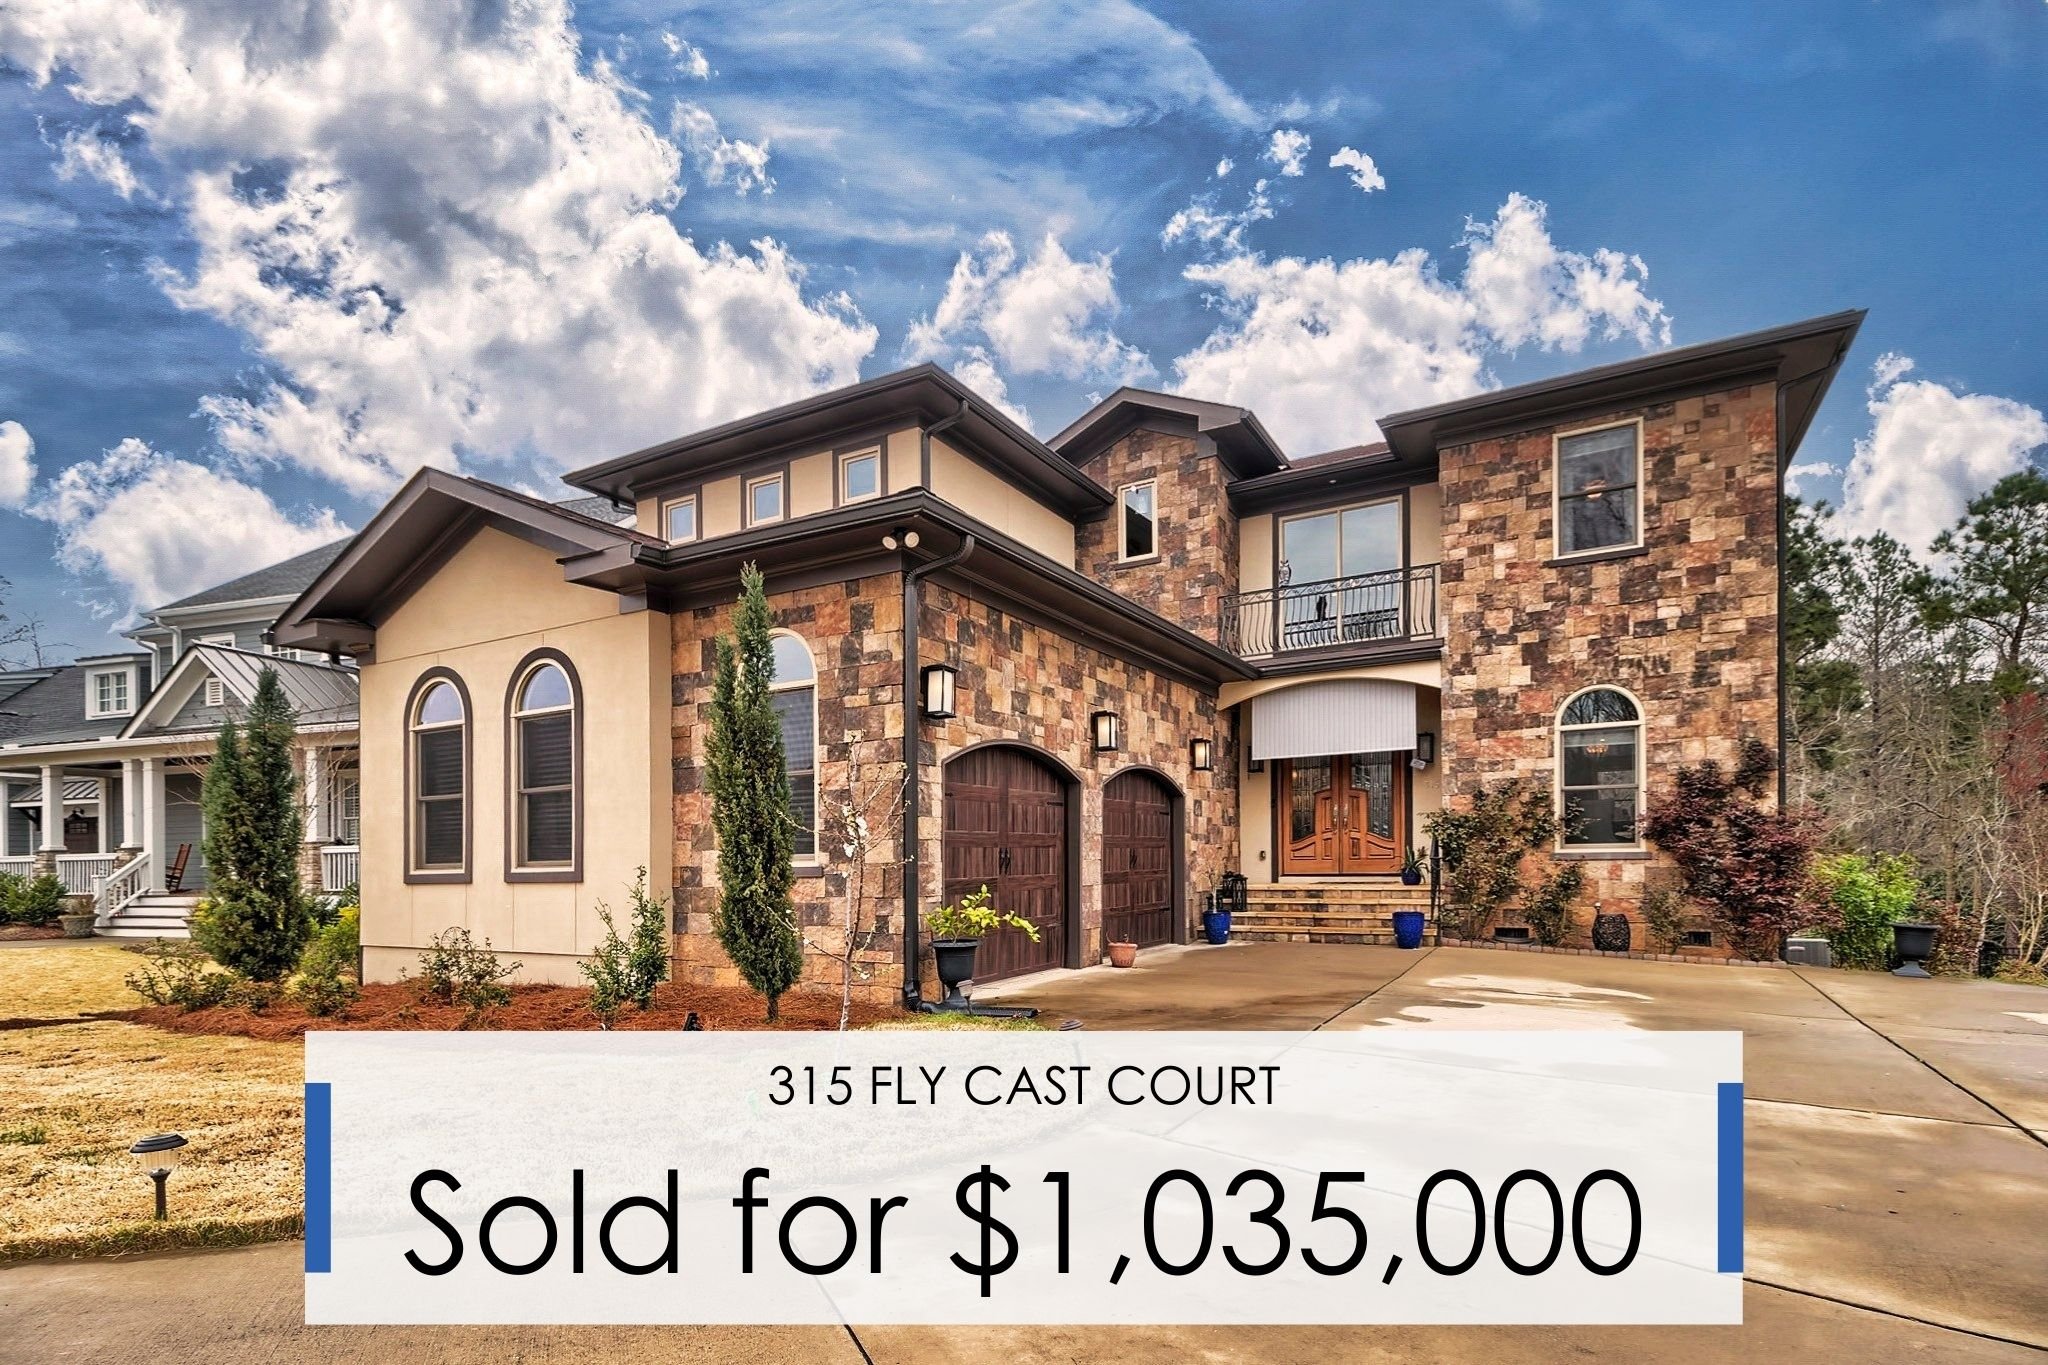 315 Fly Cast Court | Sold for $1,035,000